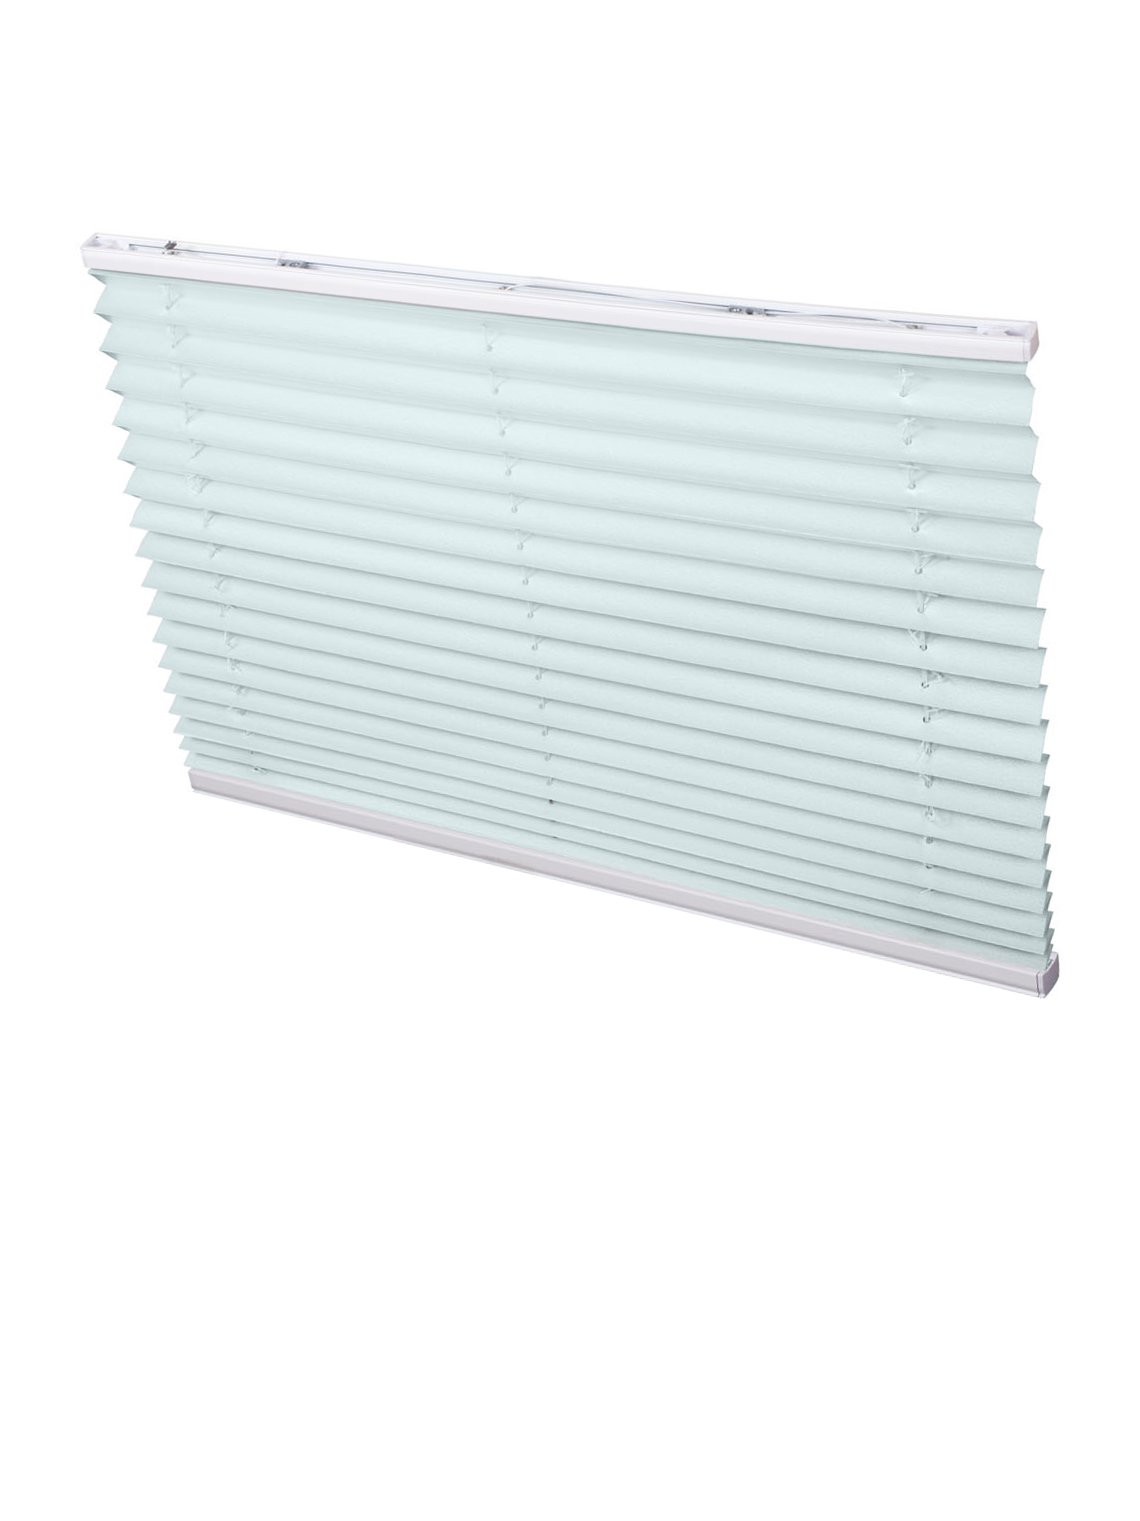 Somfy Sonesse 30 WireFree Crown & Drive for Hunter-Douglas 37mm 9020699, Window Blinds